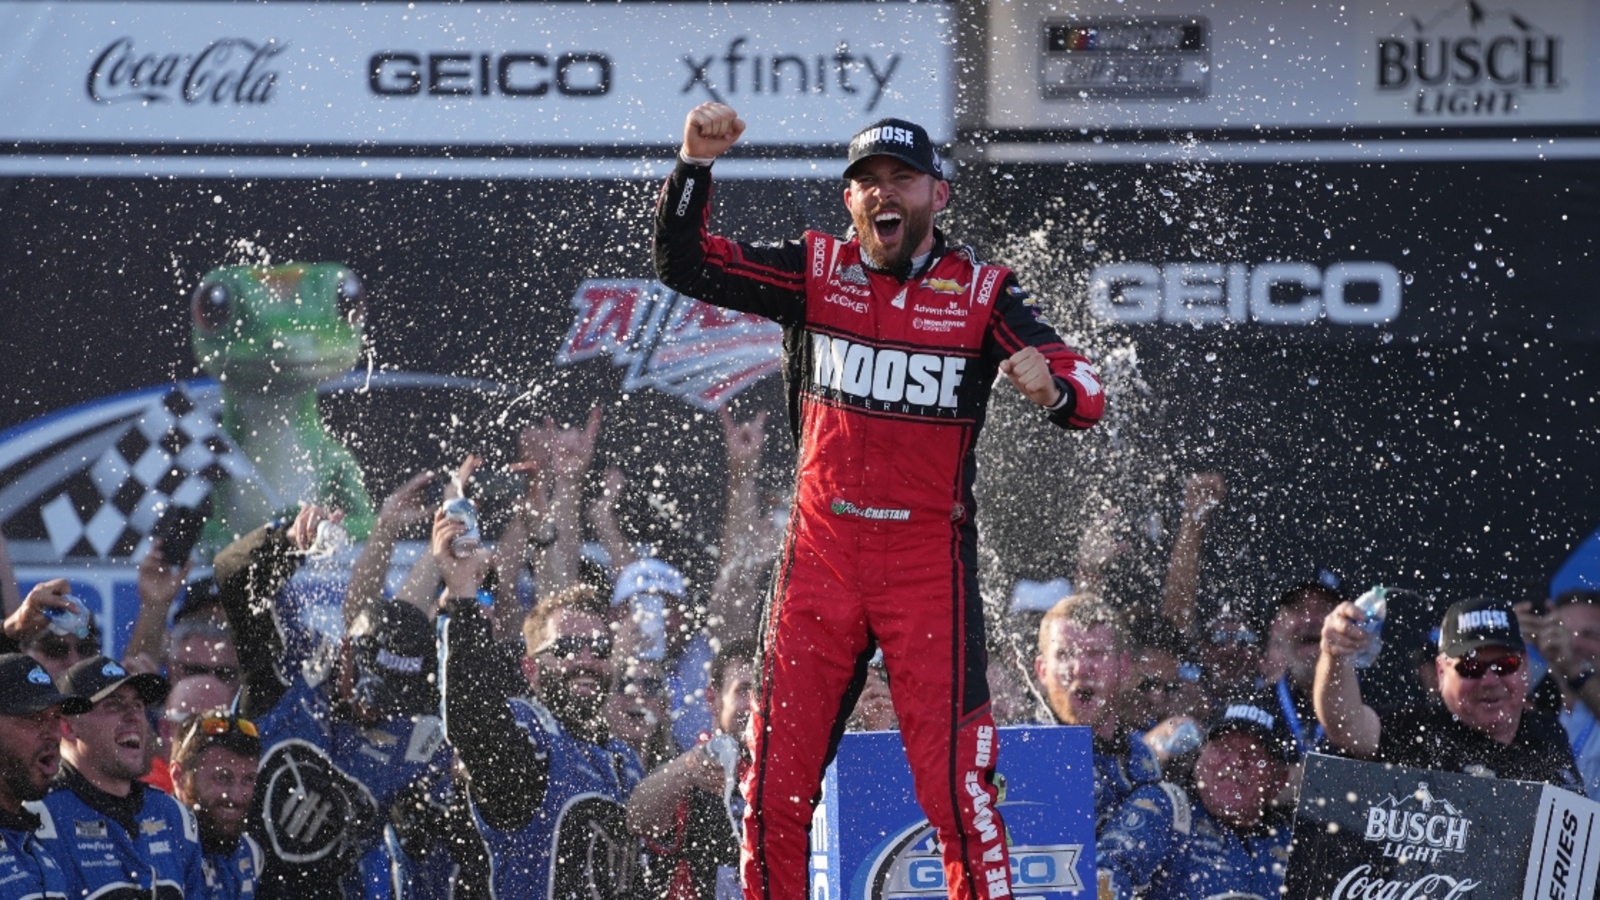 Ross Chastain reflects on improbable Talladega win two years later